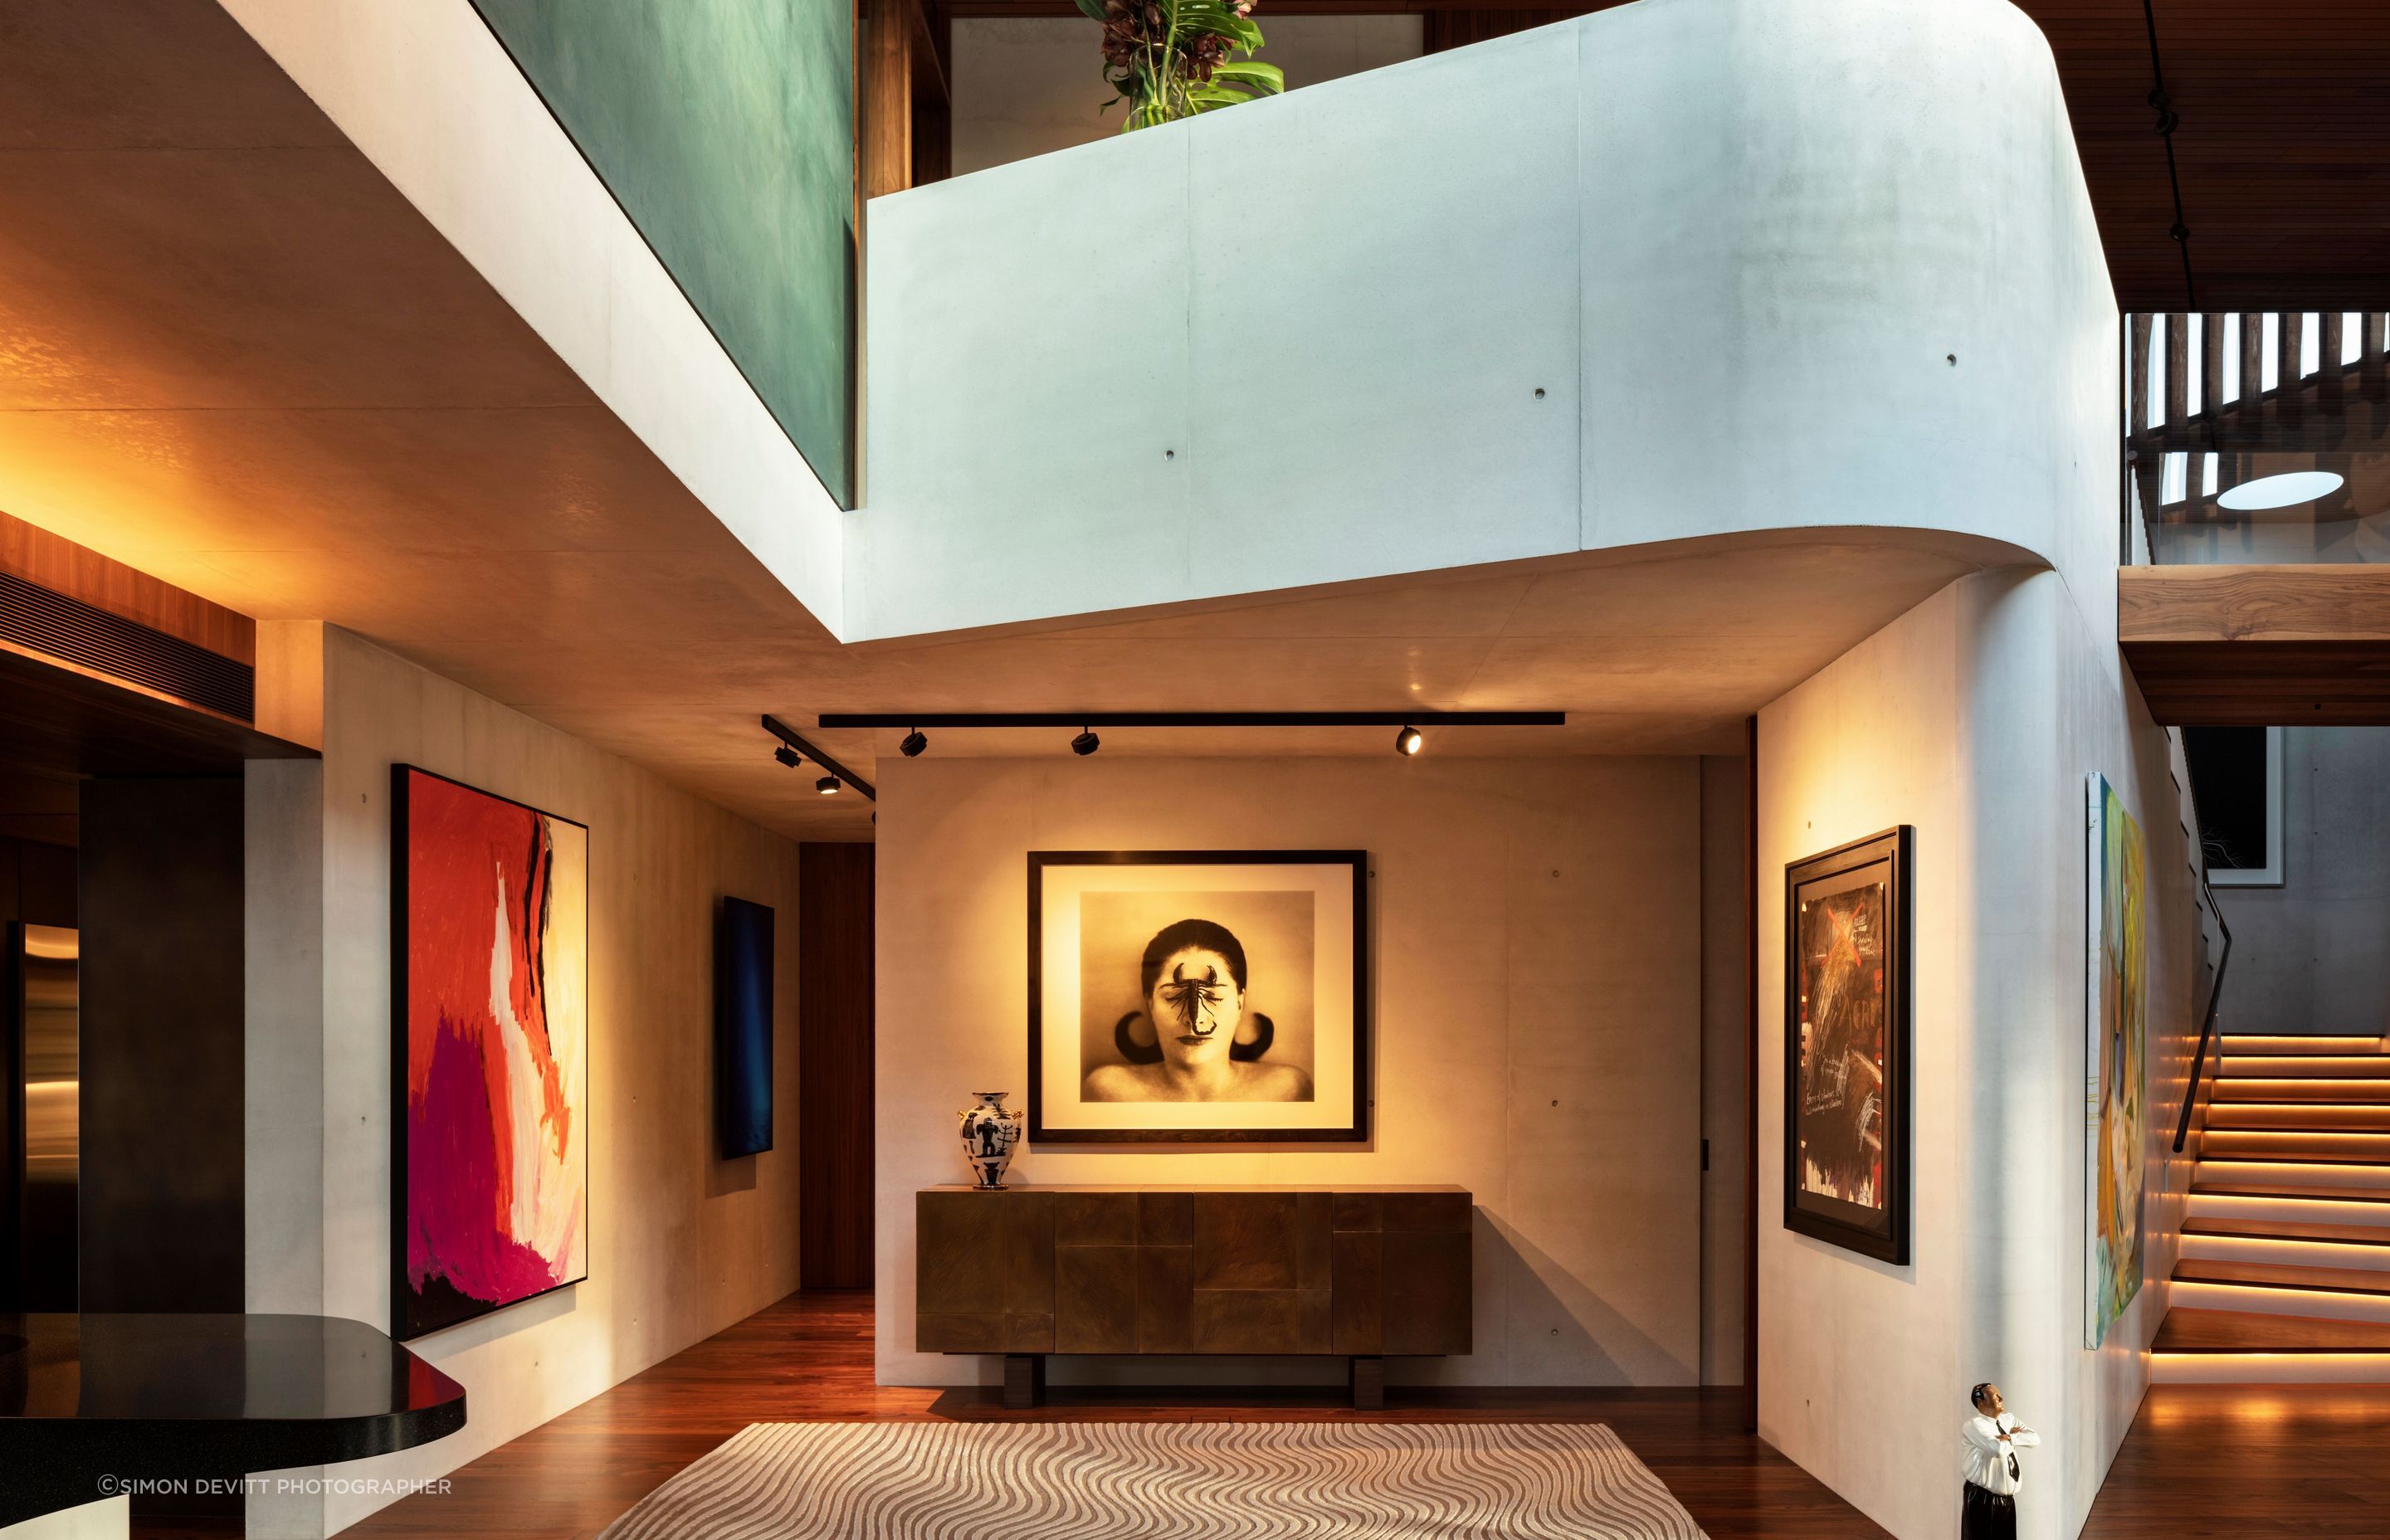 The textured white concrete walls were the perfect backdrop for the client's impressive art collection.